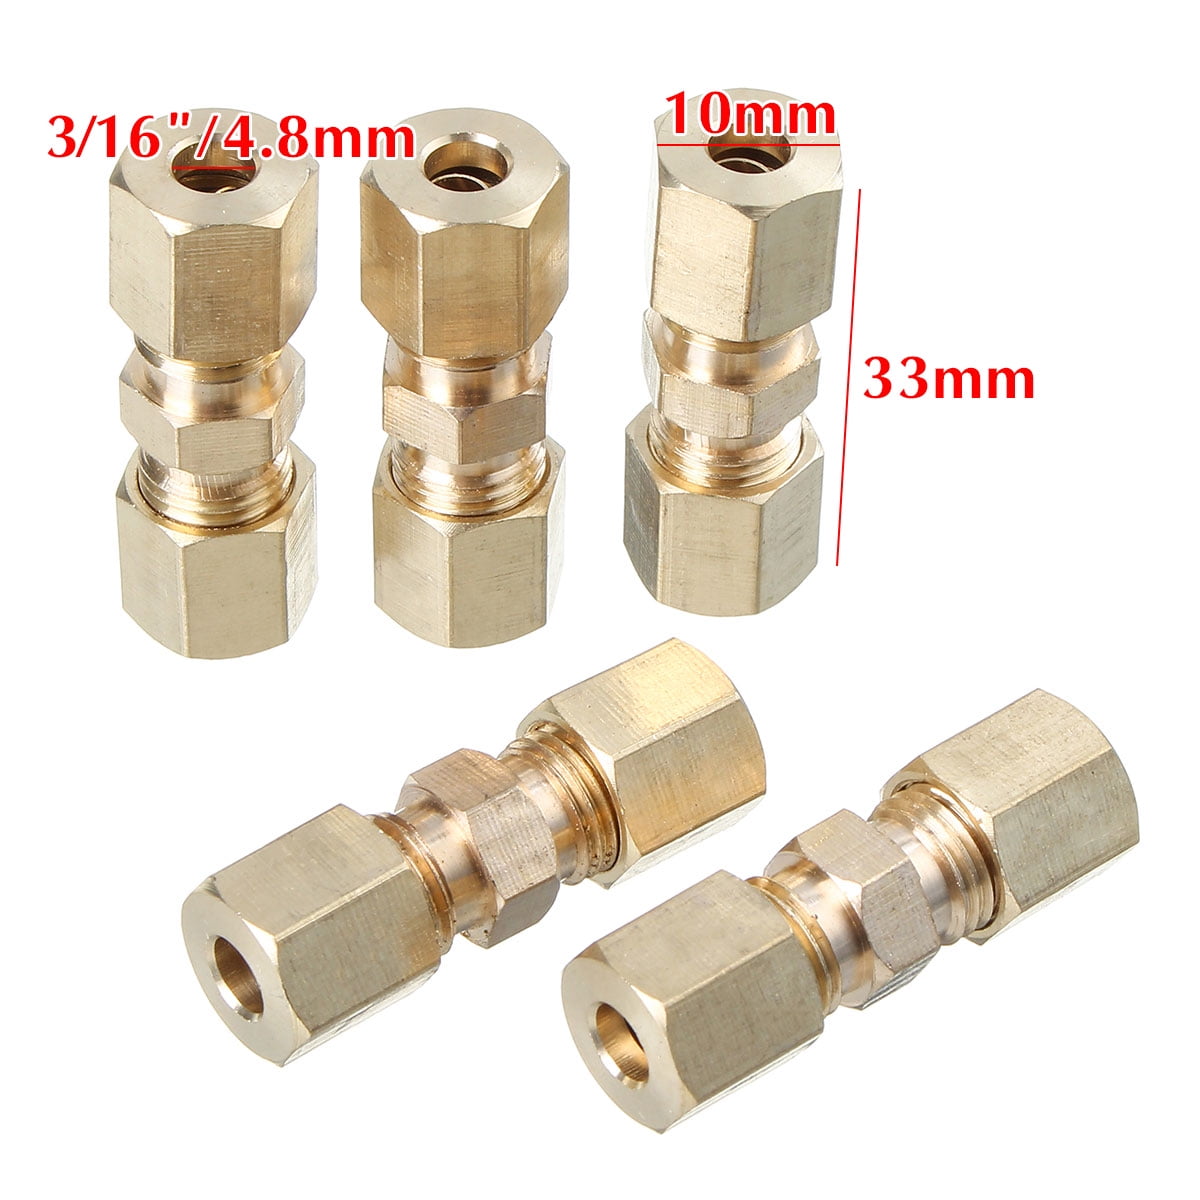 1/4" Brass Compression fitting for hydraulic brake lines 5/package